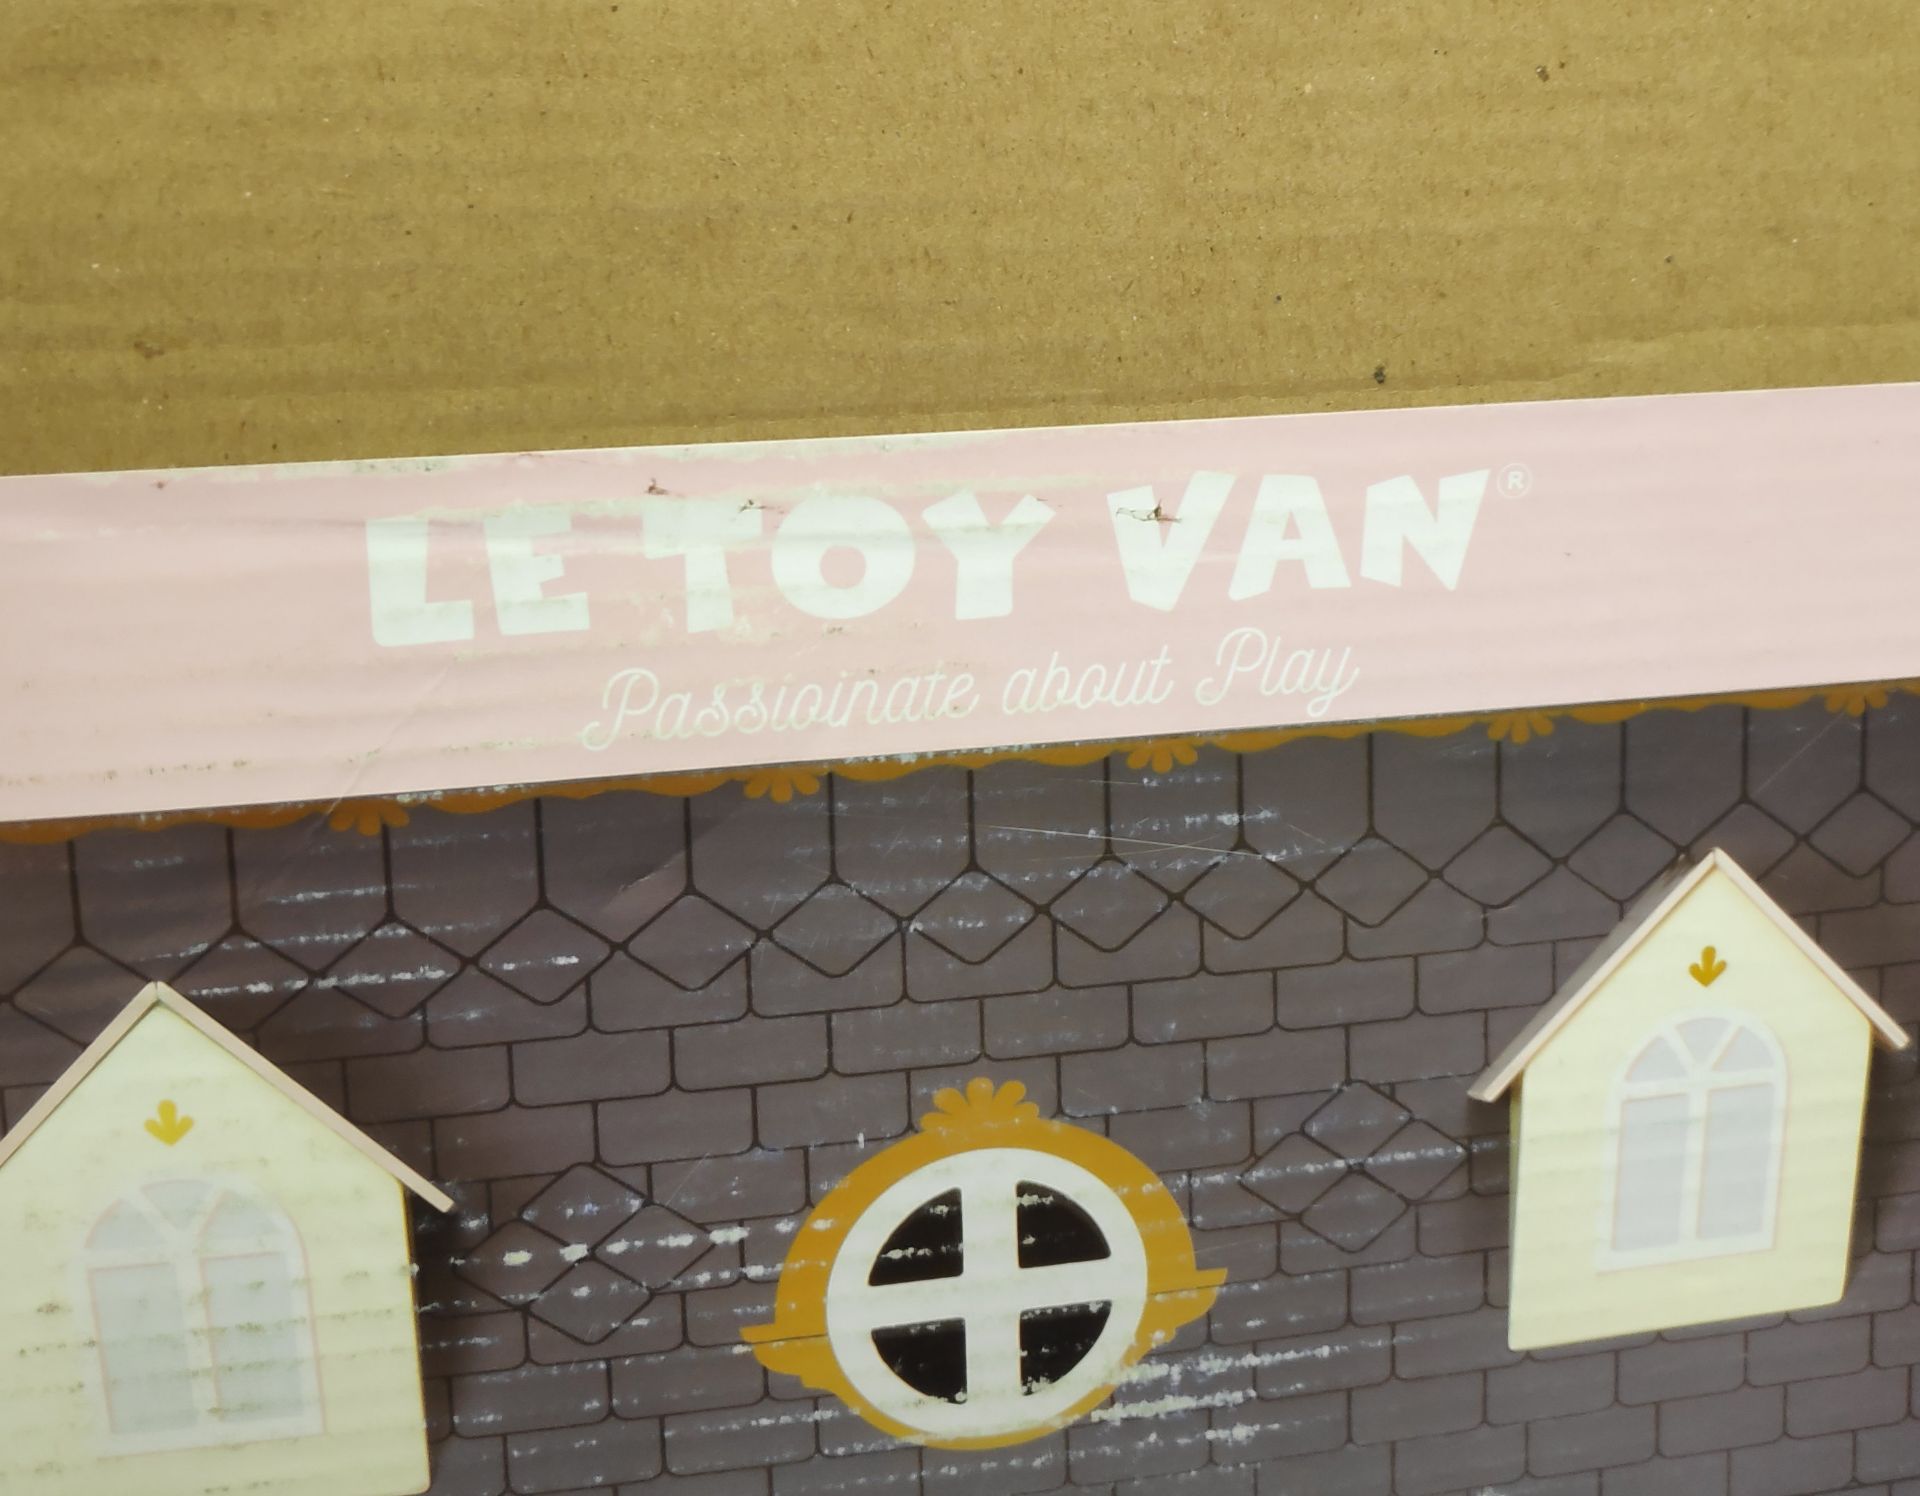 1 x Le Toy Van Wooden Palace Dolls House - New/Boxed - HTYS163 - CL987 - Location: Altrincham WA14 - - Image 10 of 10